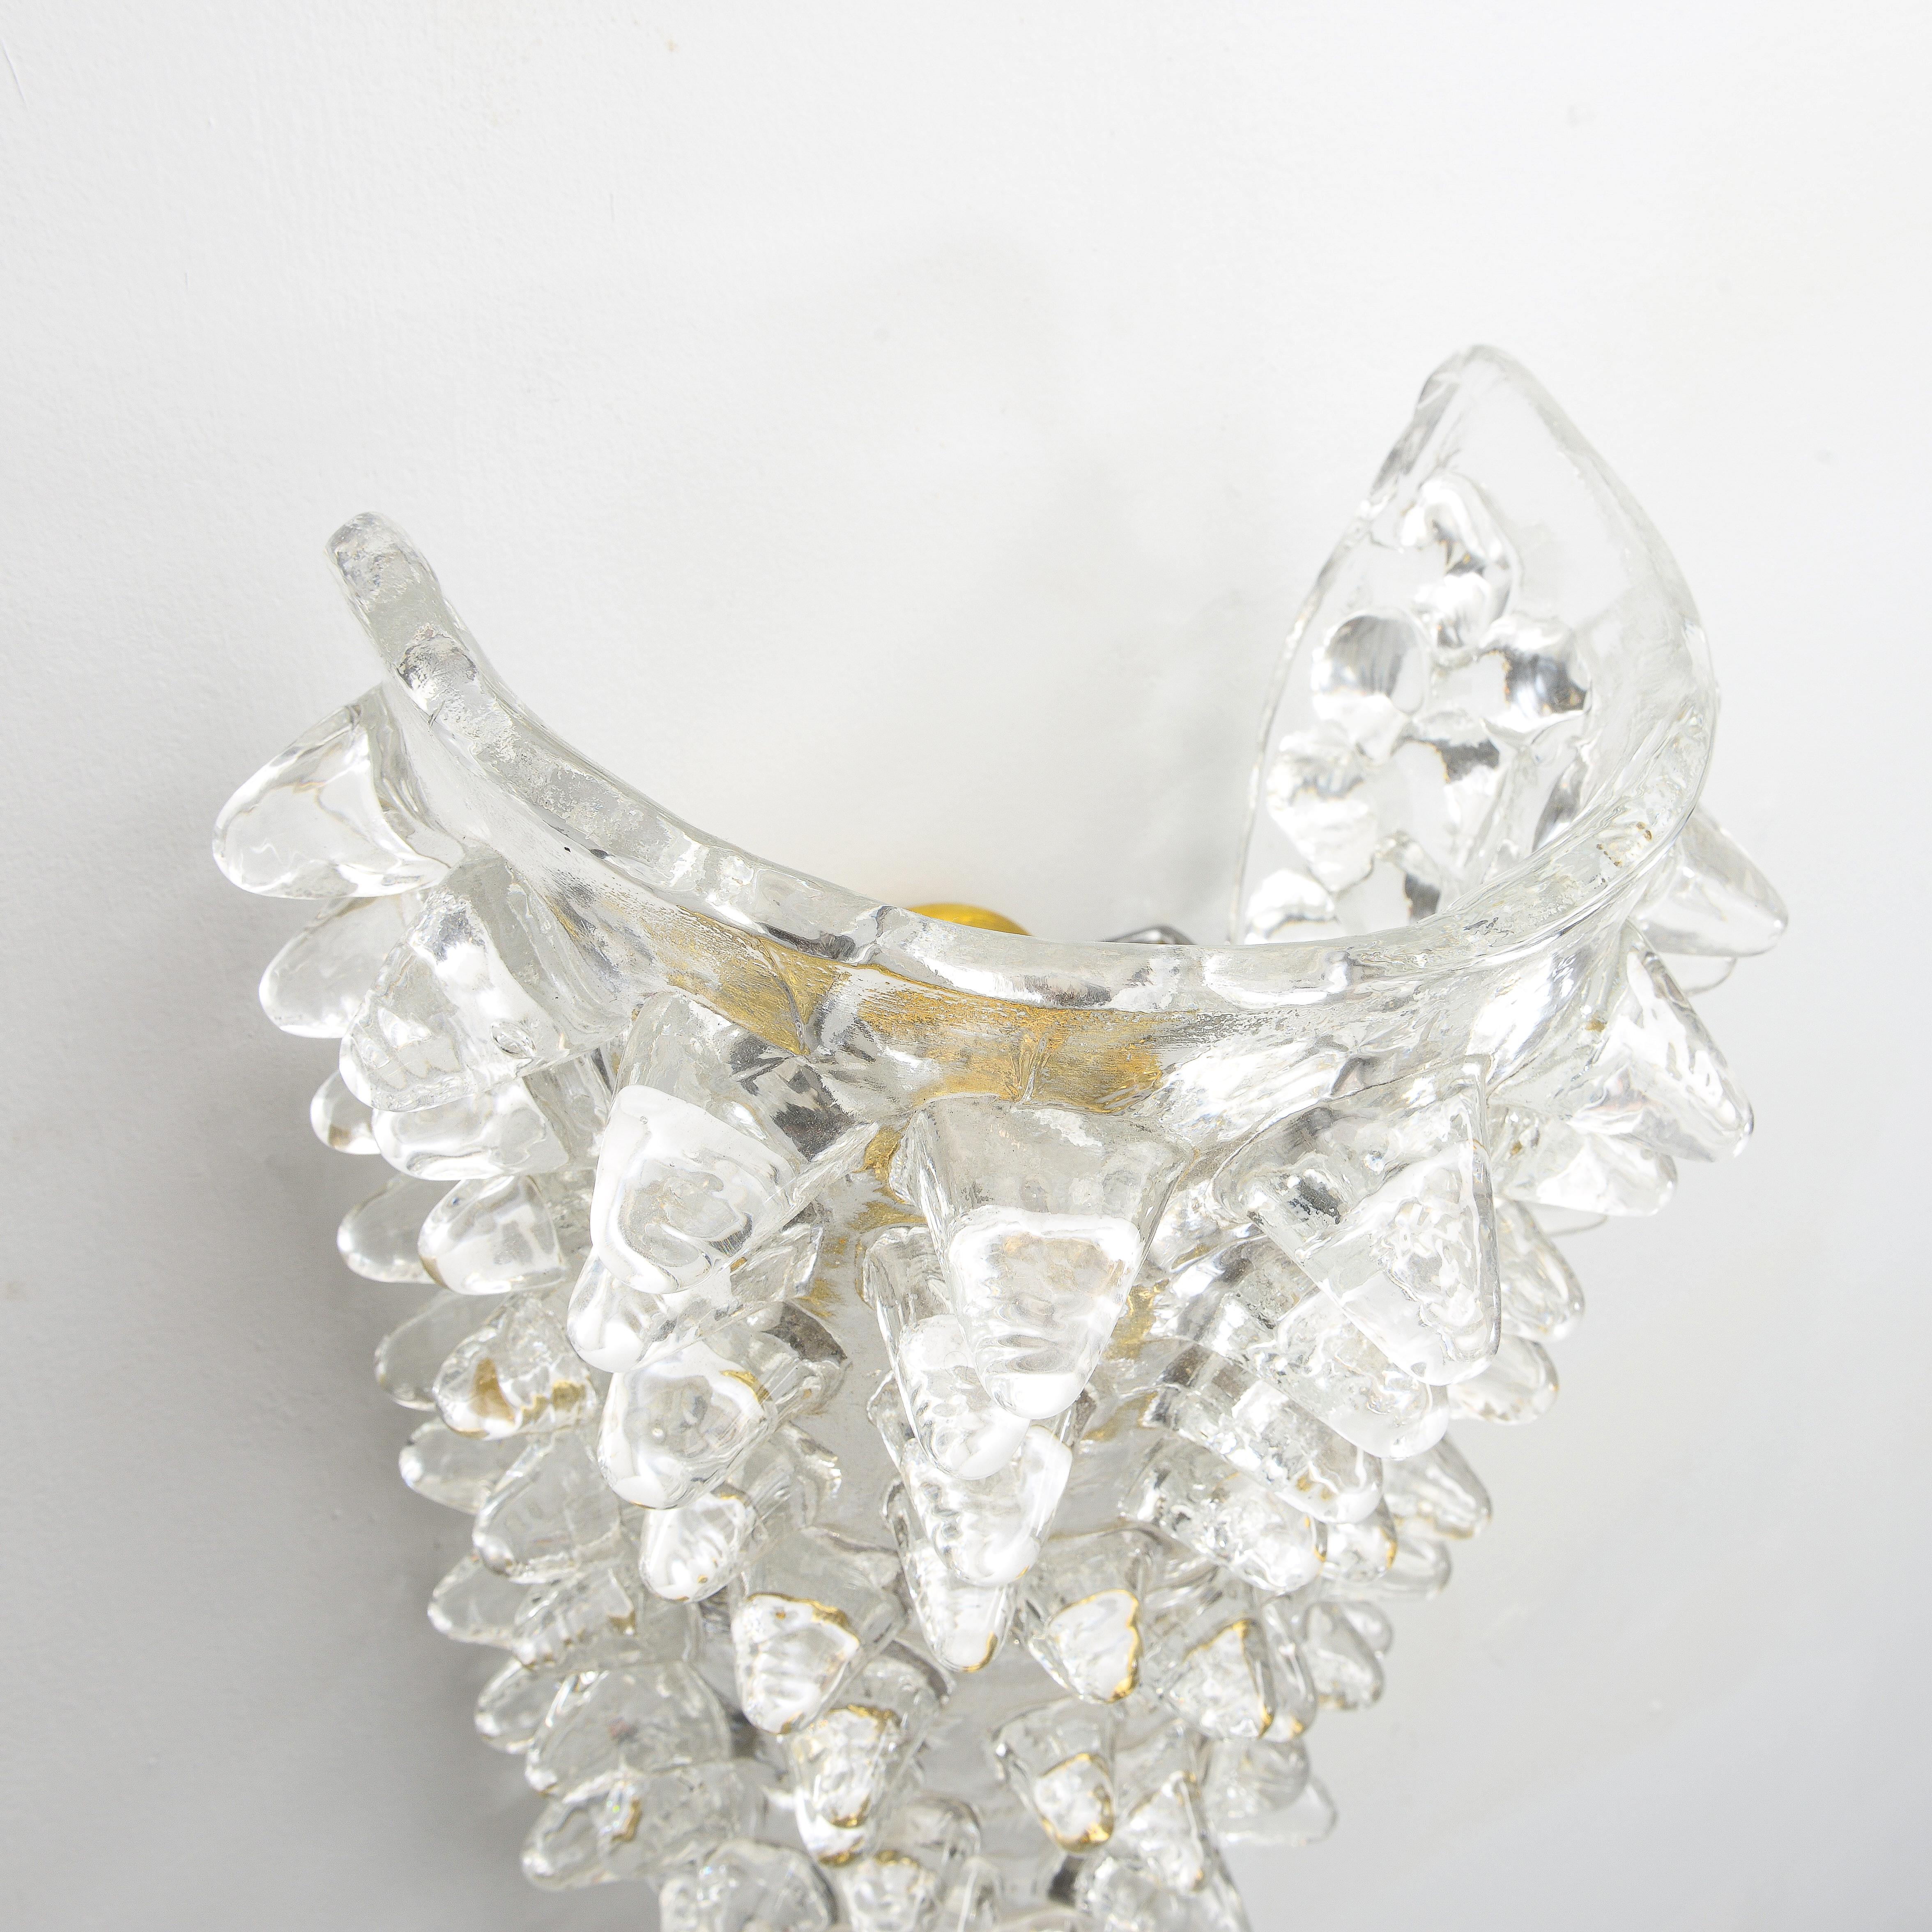 Contemporary Murano Glass Sconces in the Manner of Barovier Toso For Sale 5